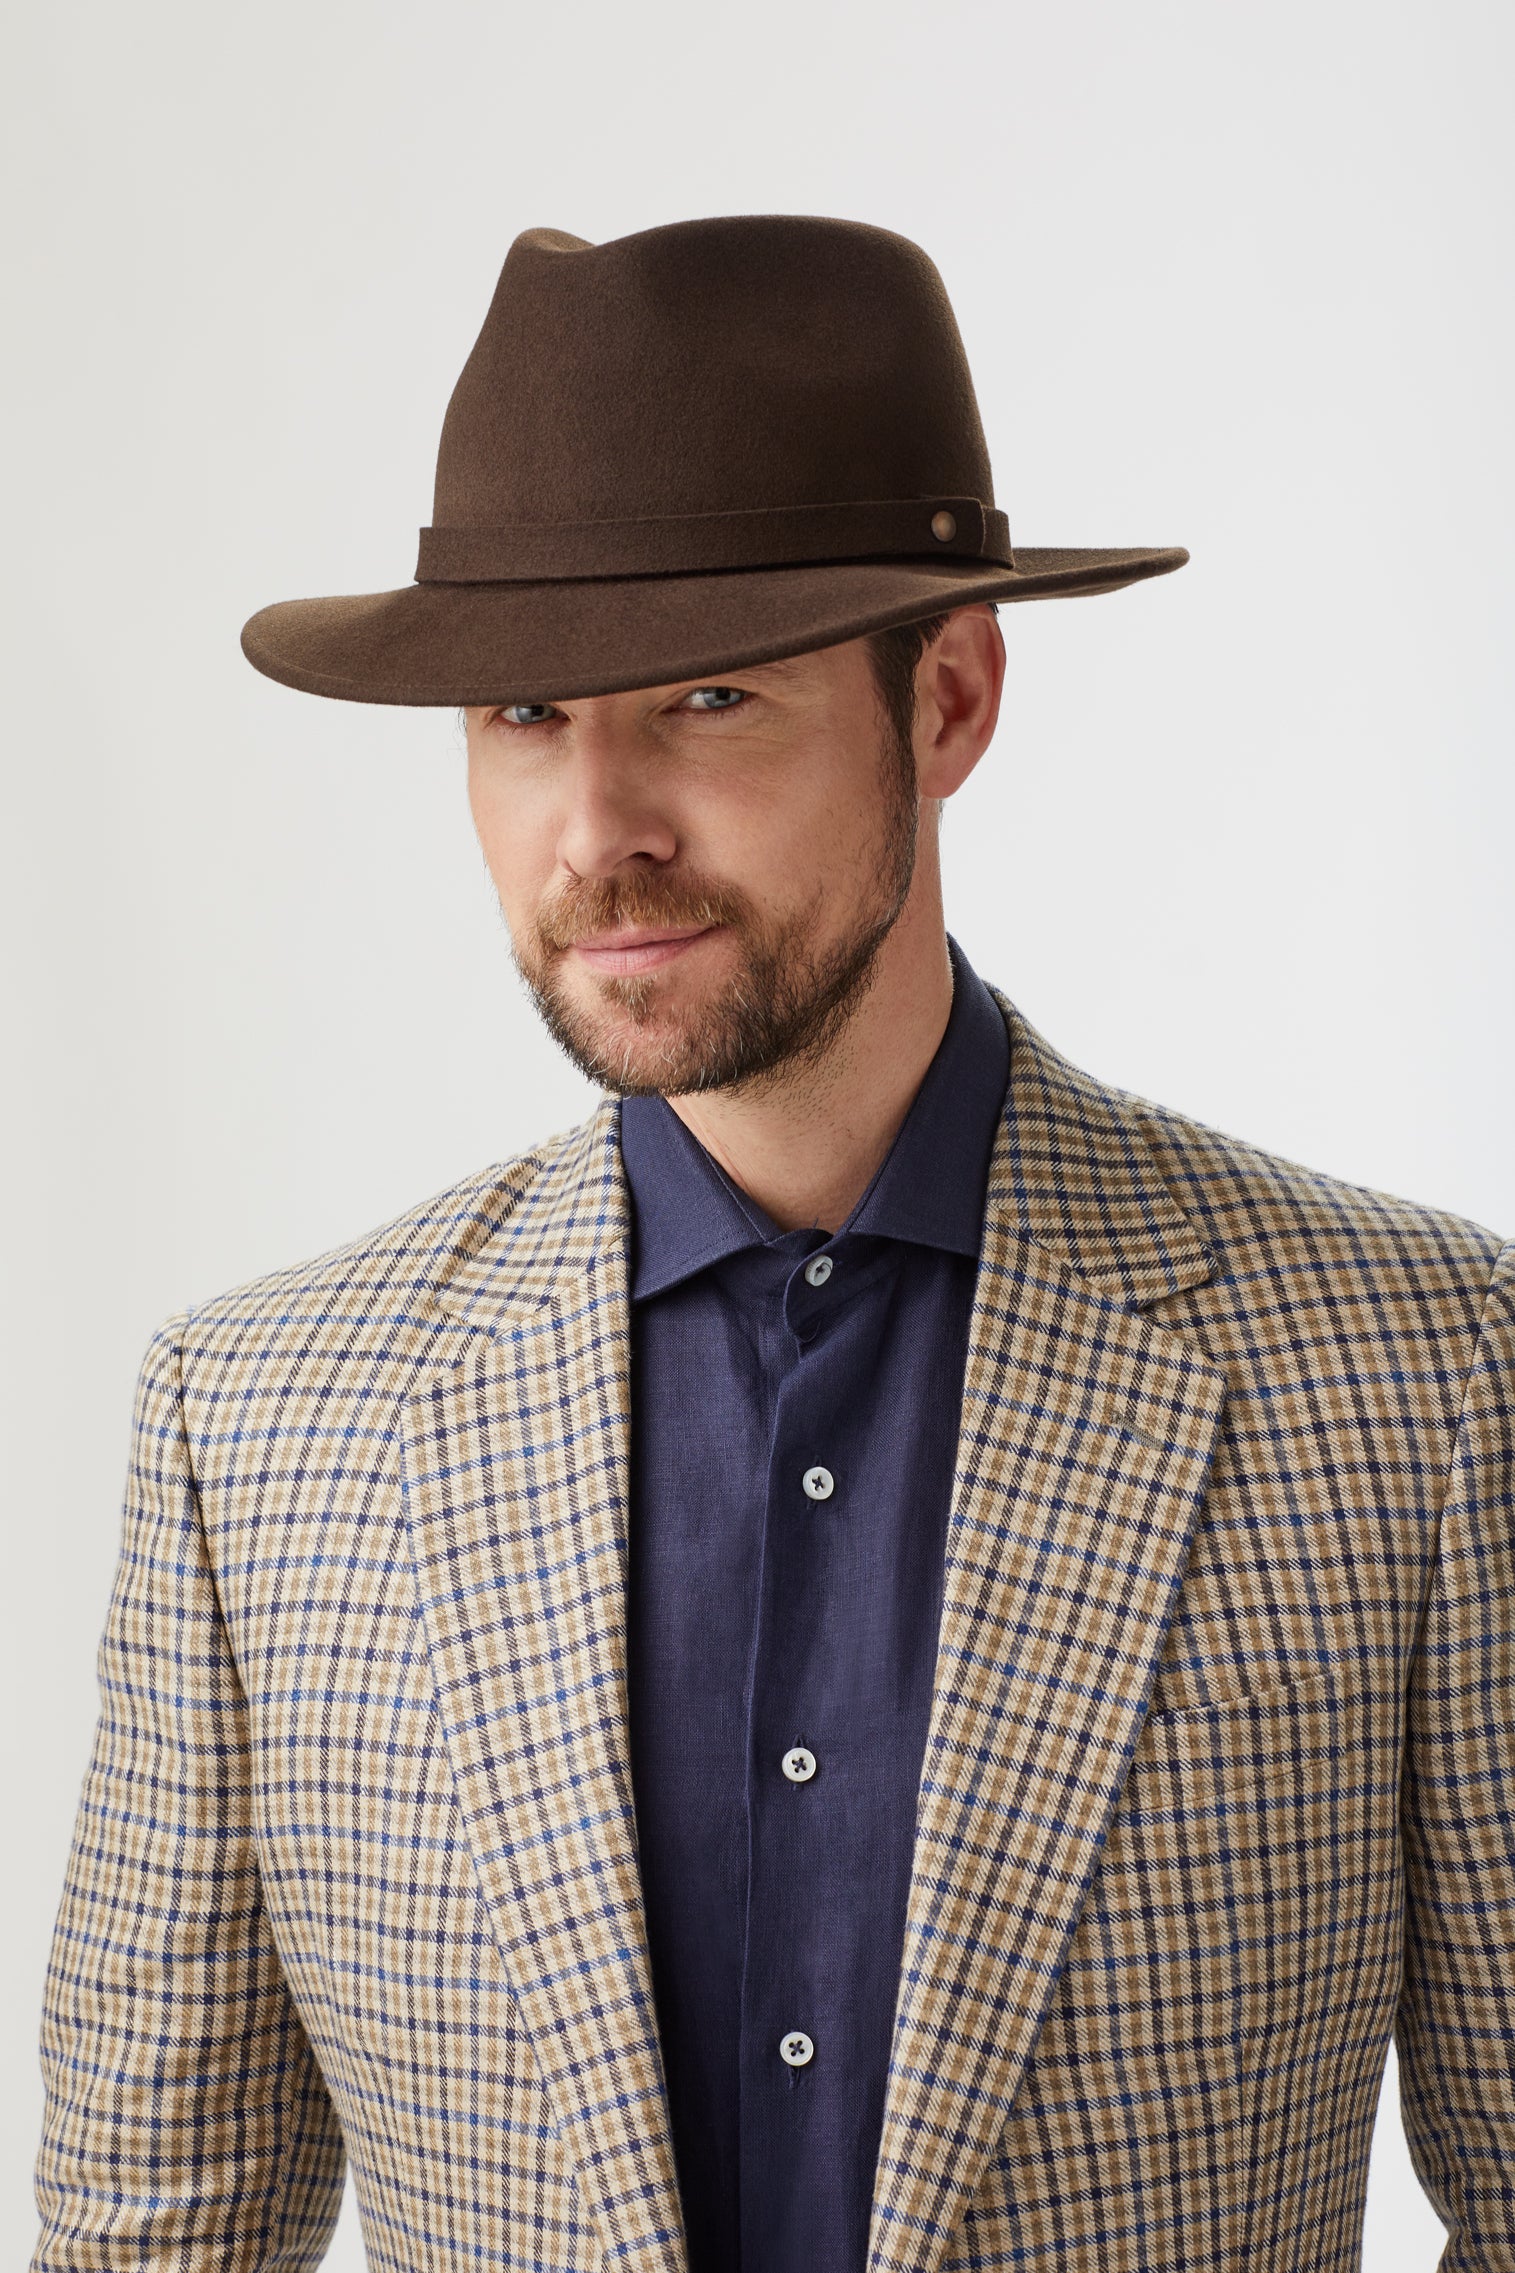 Nomad Rollable Trilby - Men's Packable & Rollable Hats - Lock & Co. Hatters London UK